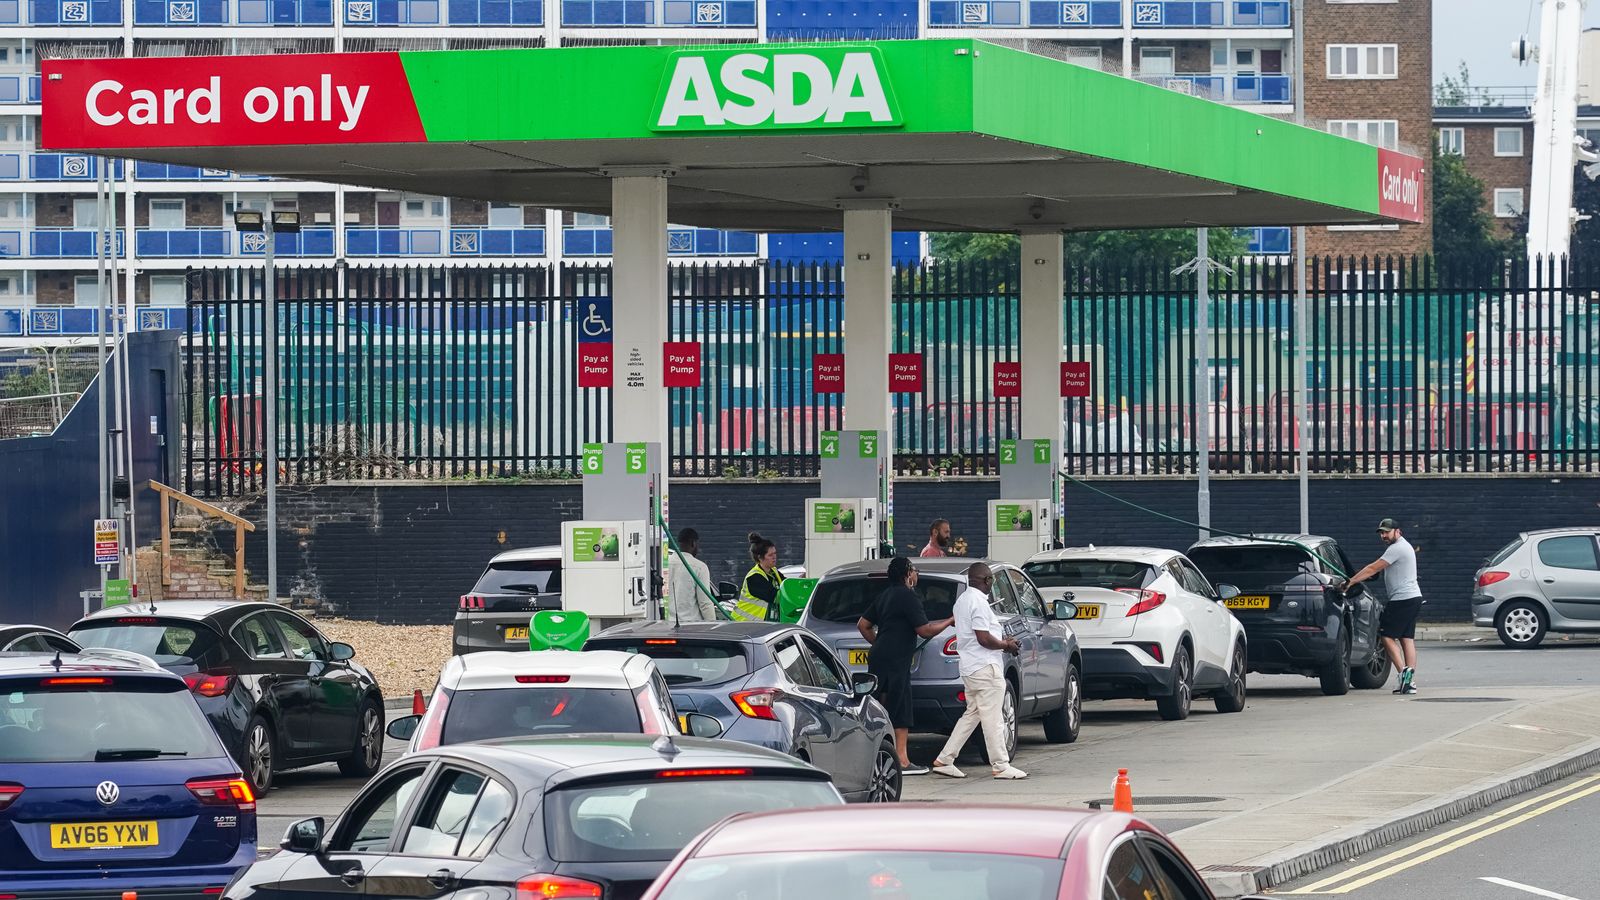 Asda to Acquire EG Group's UK and Ireland Petrol Station Business for £2.27bn